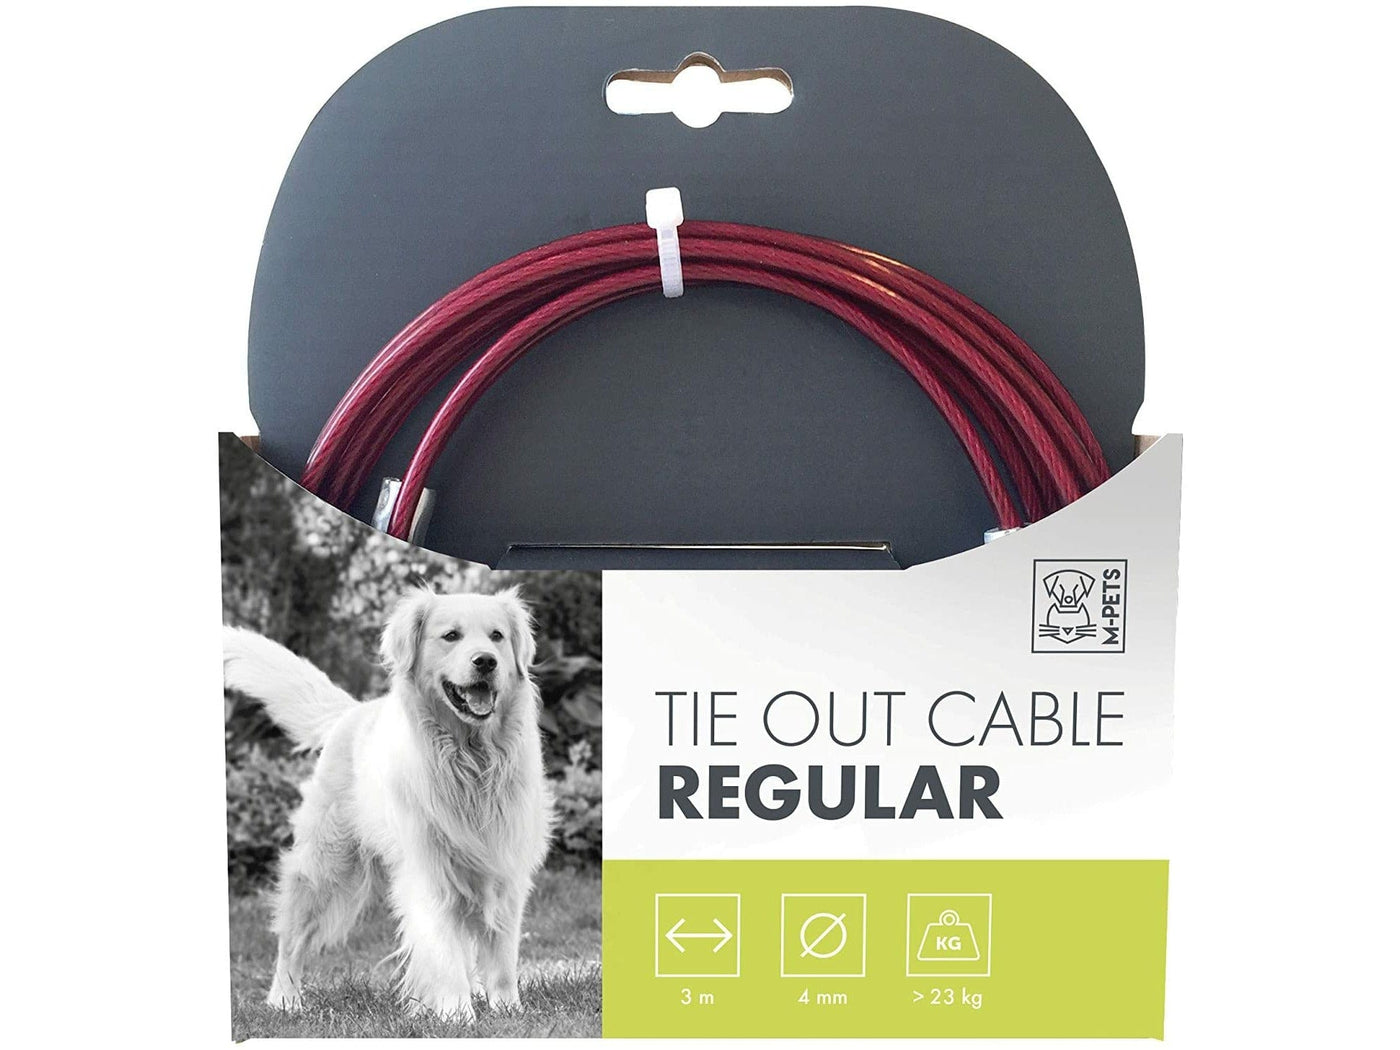 TIE OUT CABLE REGULAR - 920LB-3M RED